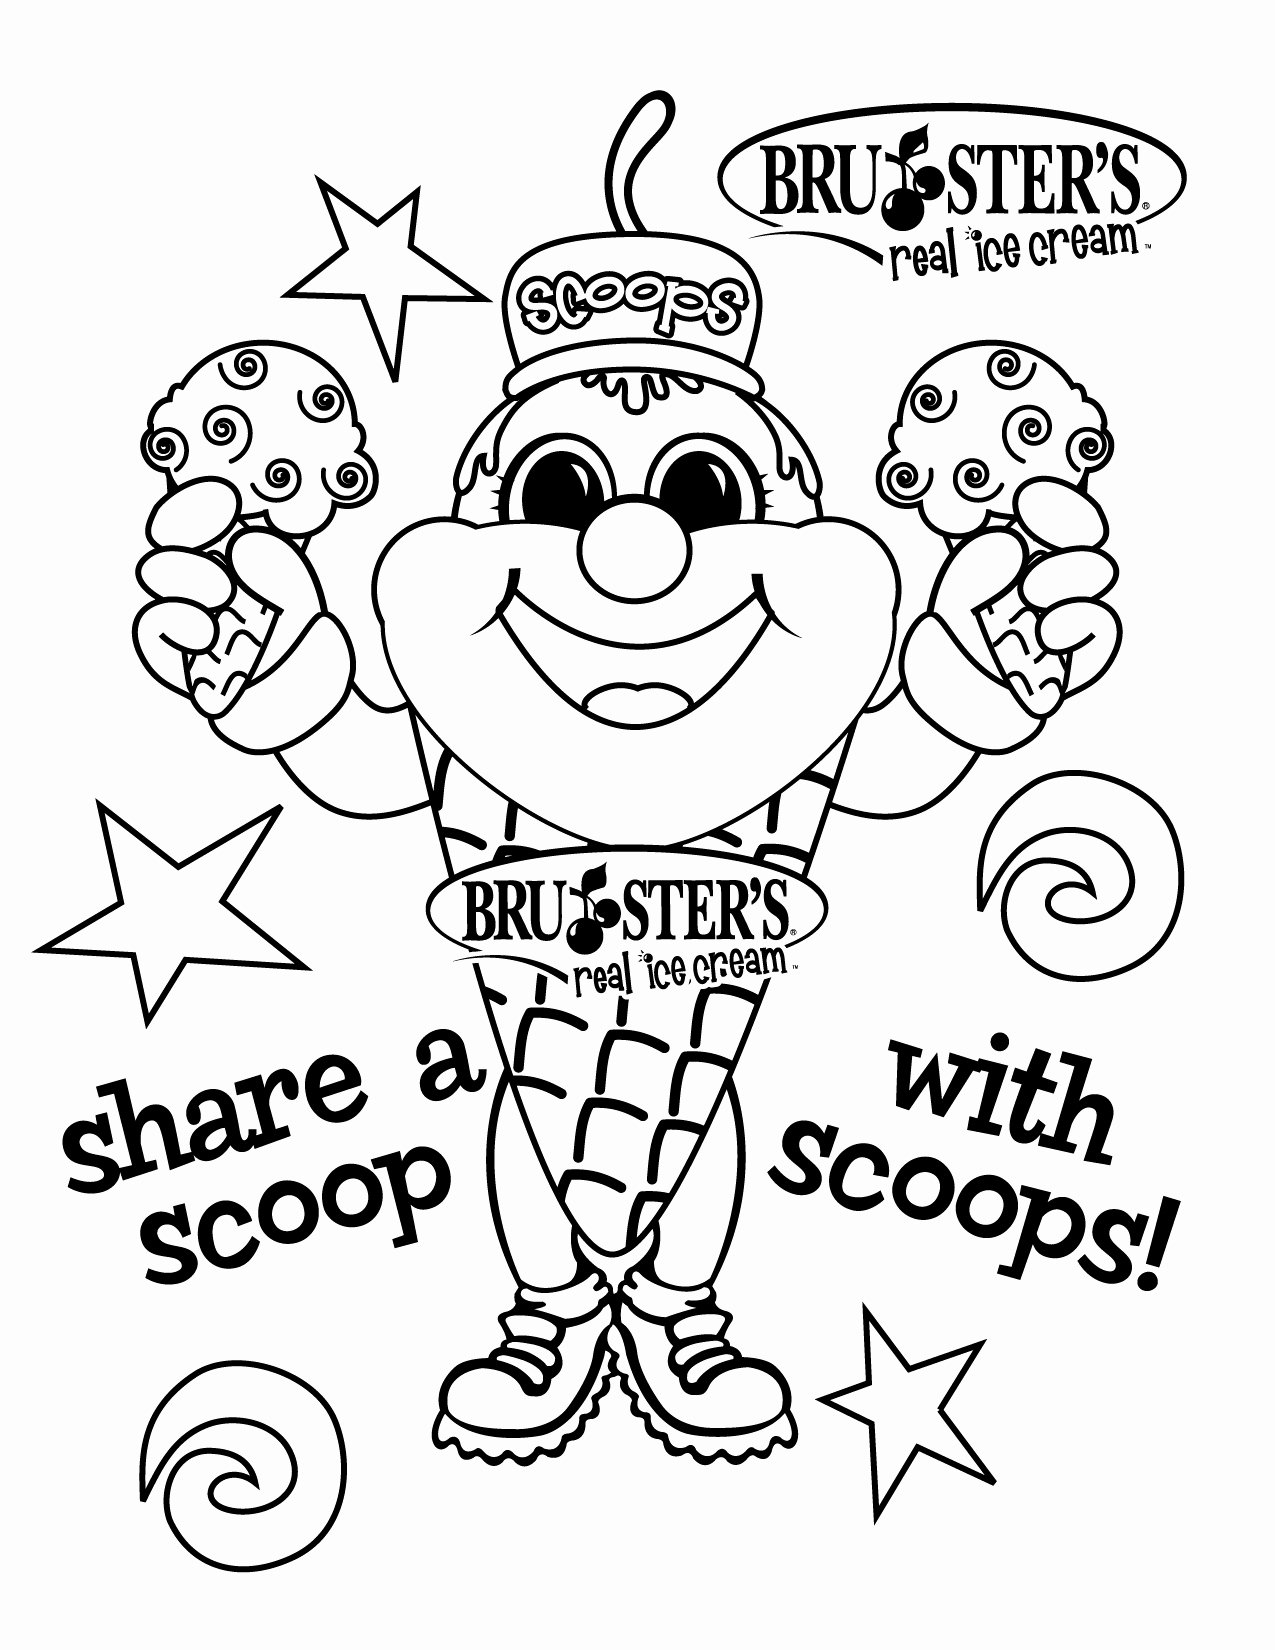 Ice Cream Scoop Coloring Pages Lovely Brusters | Meriwer Coloring